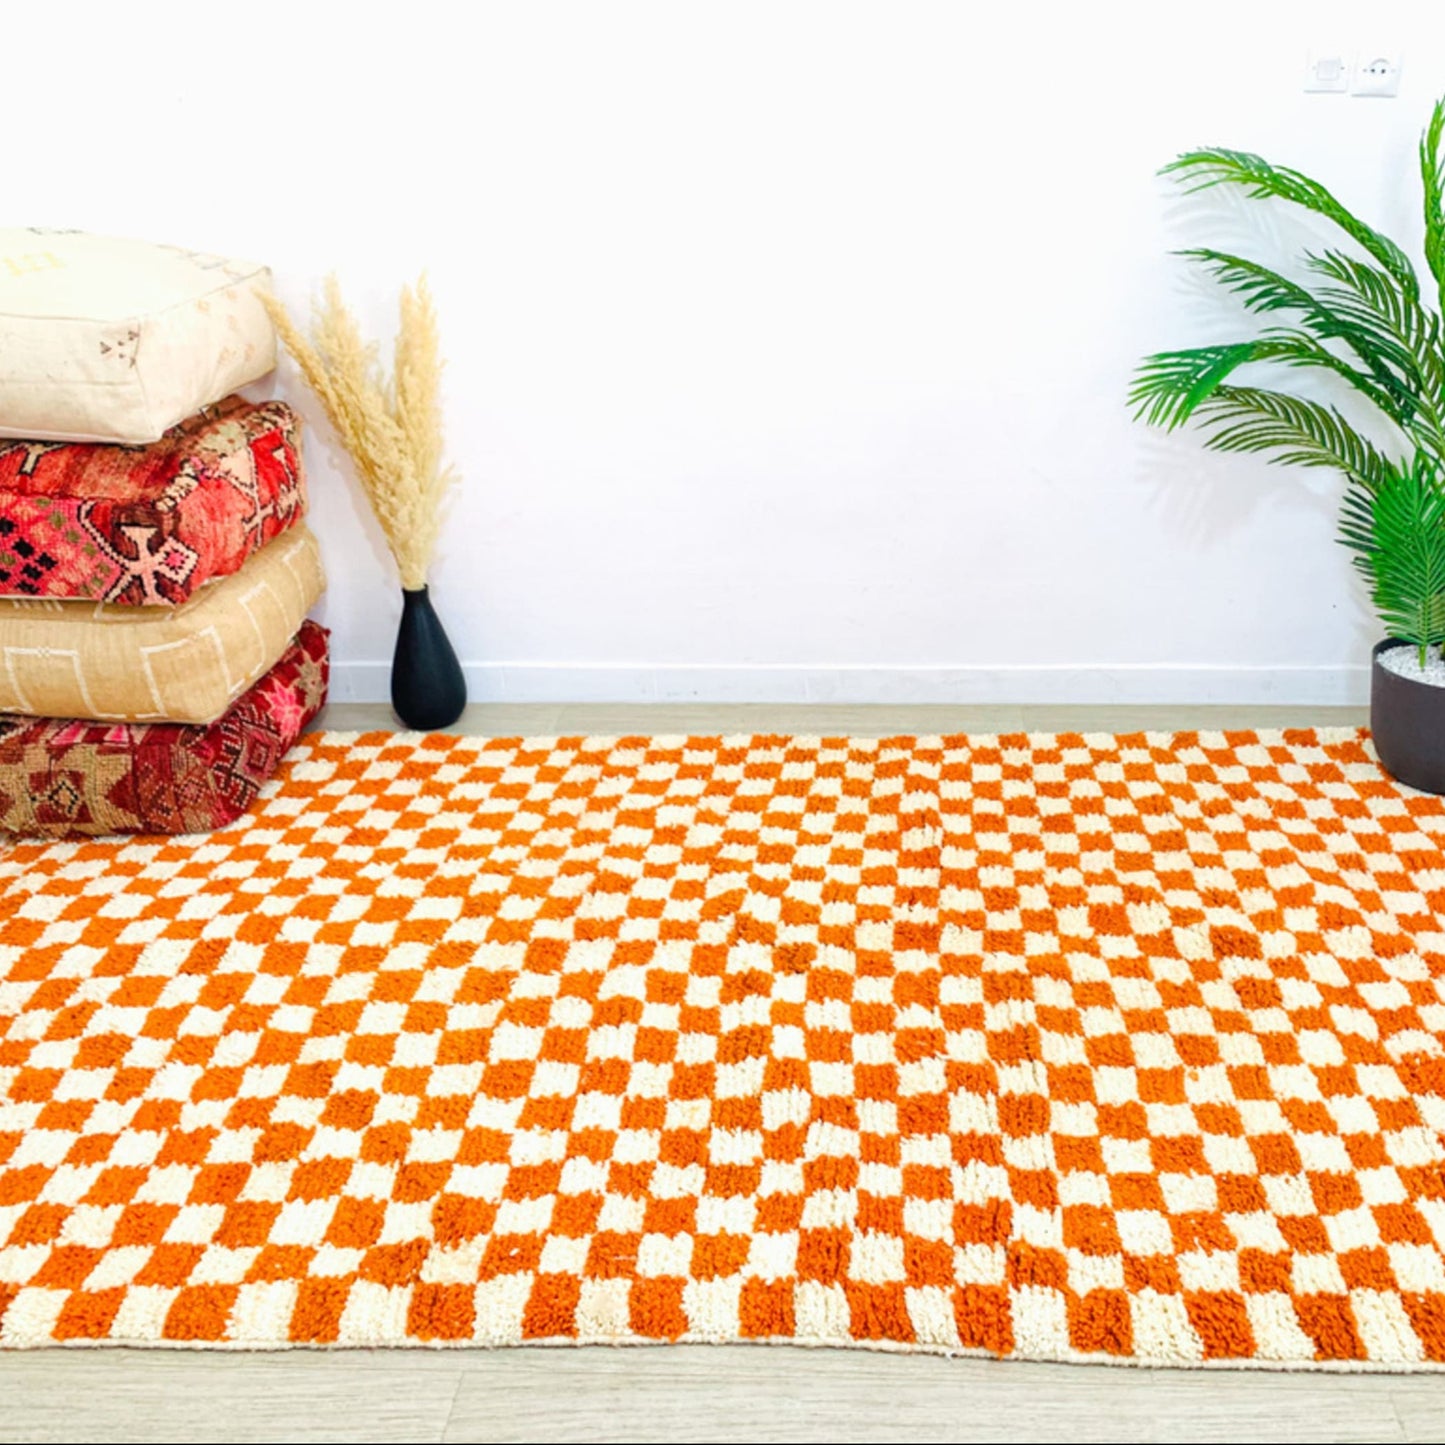 ORANGE-RED-CHECKERED-RUG-IN-LIVING-ROOM-WITH PLANT